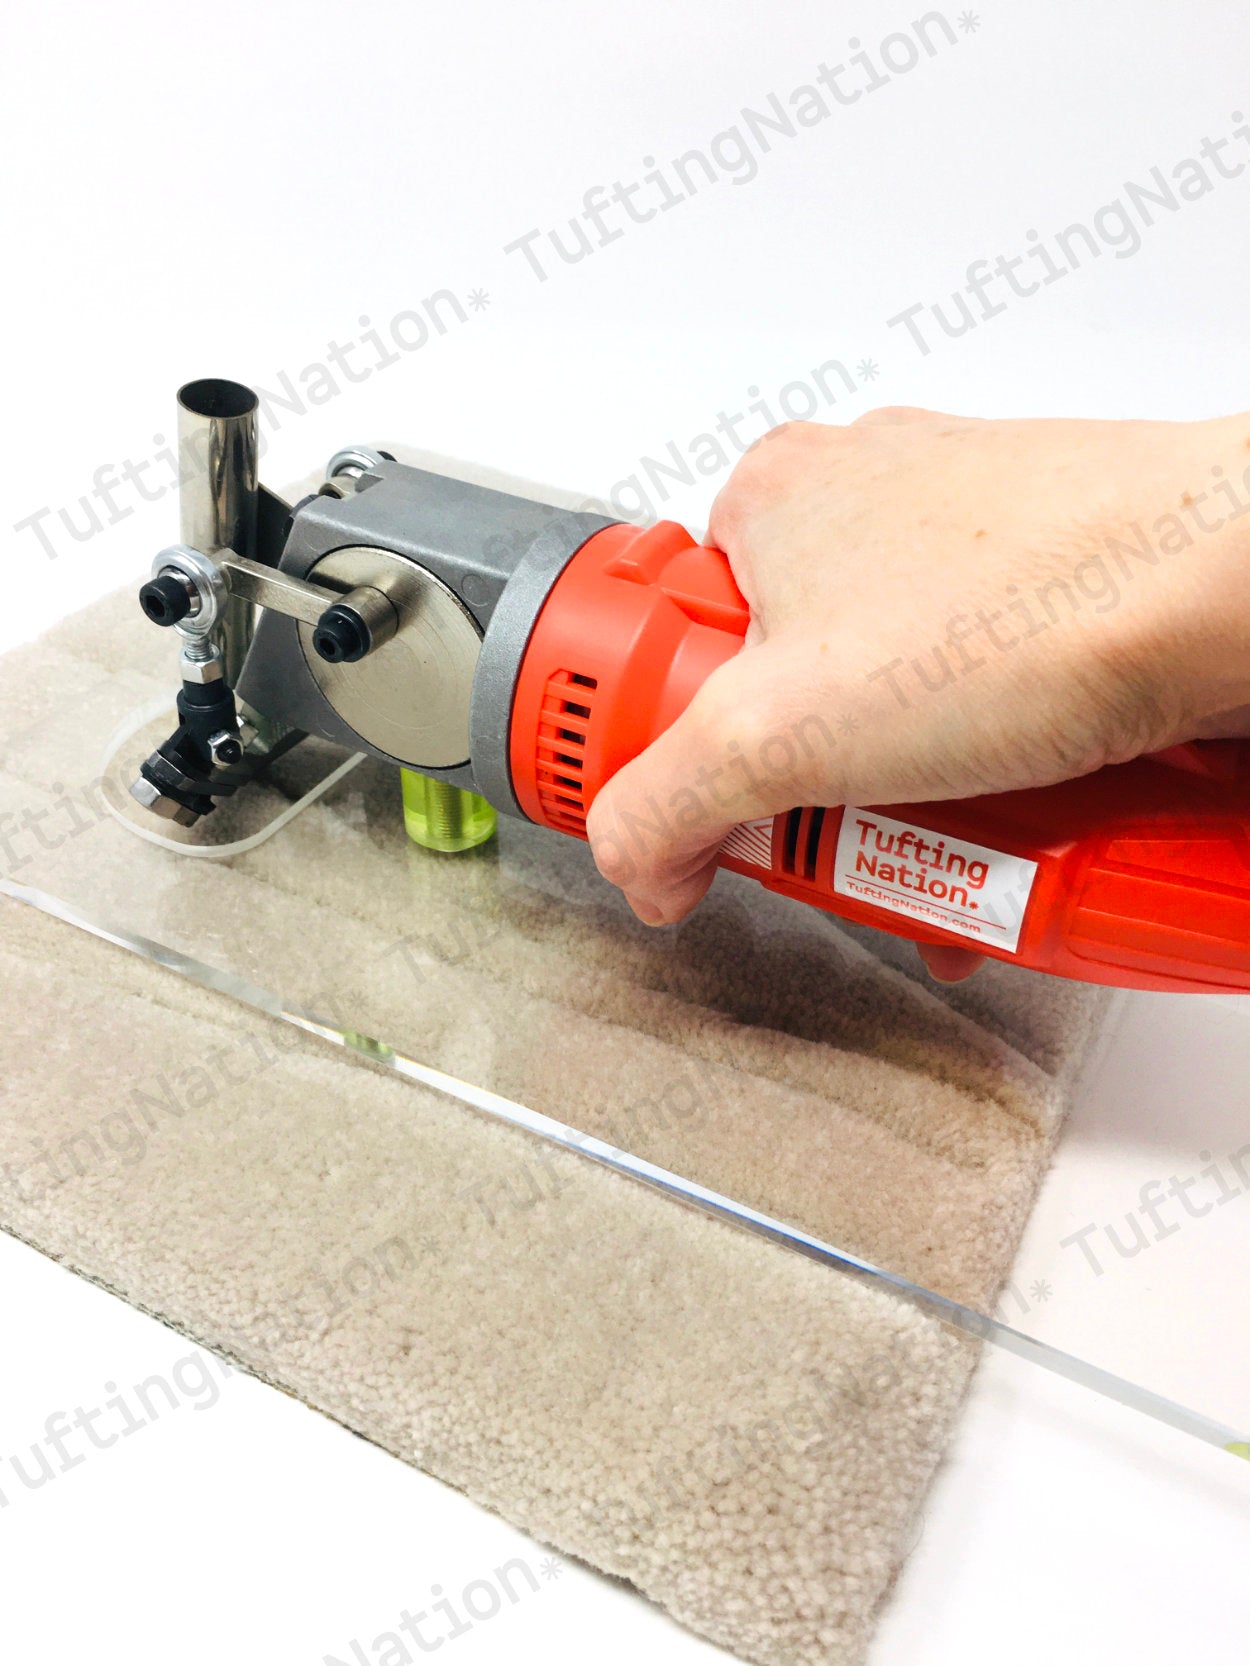 Carpet Carving Machine to make groove on rug surface | TuftingNation Canada